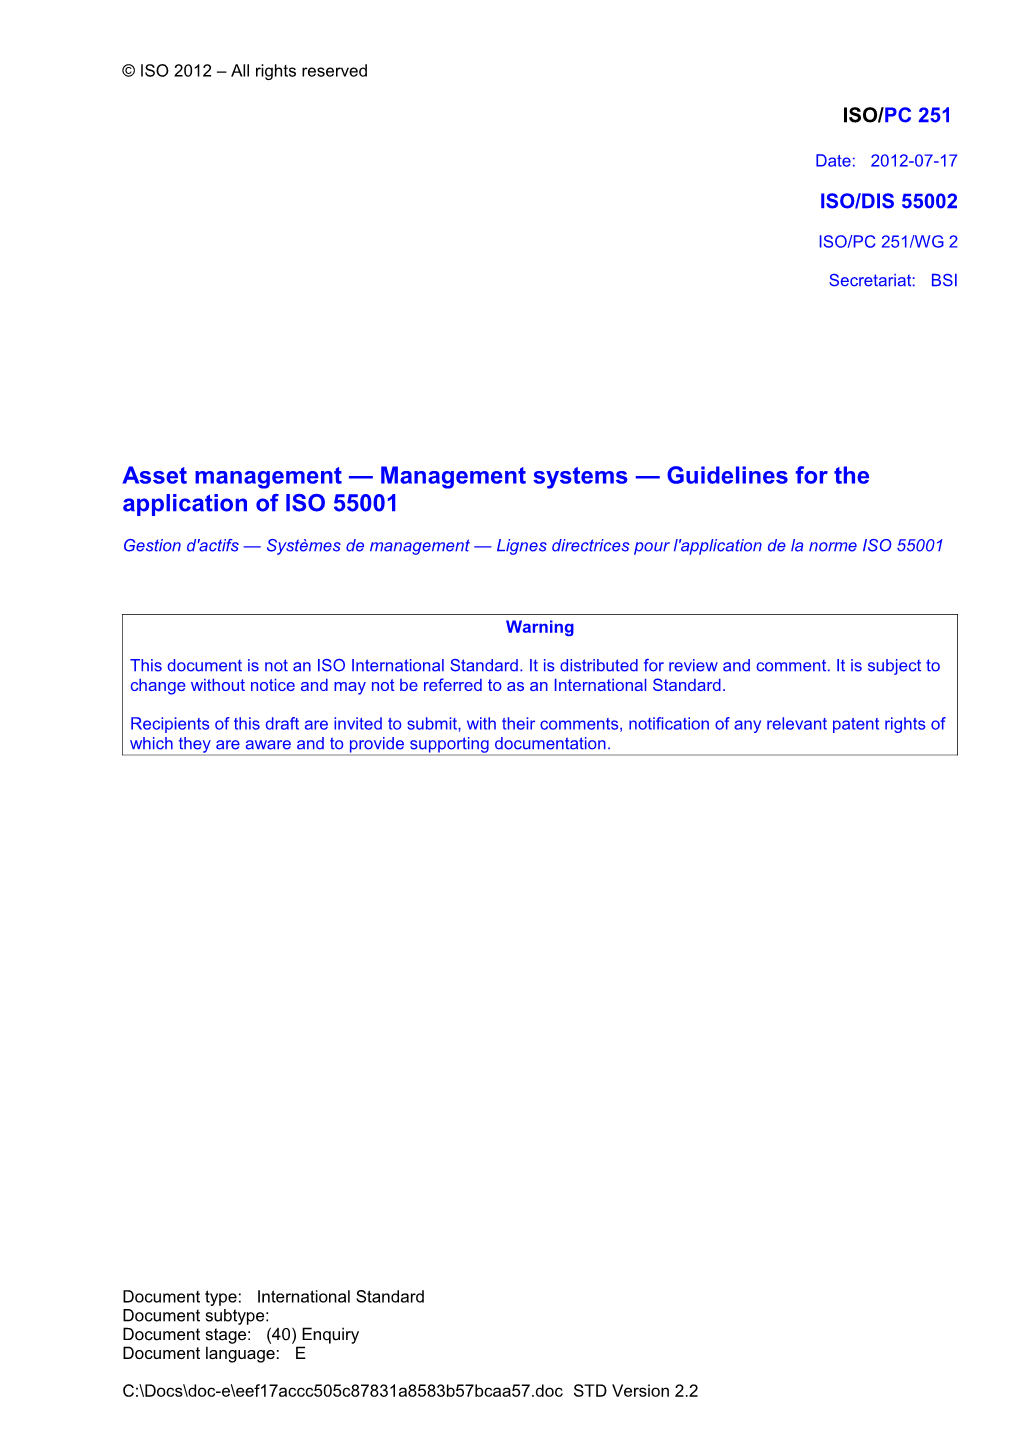 Asset Management Management Systems Guidelines for the Application of ISO 55001